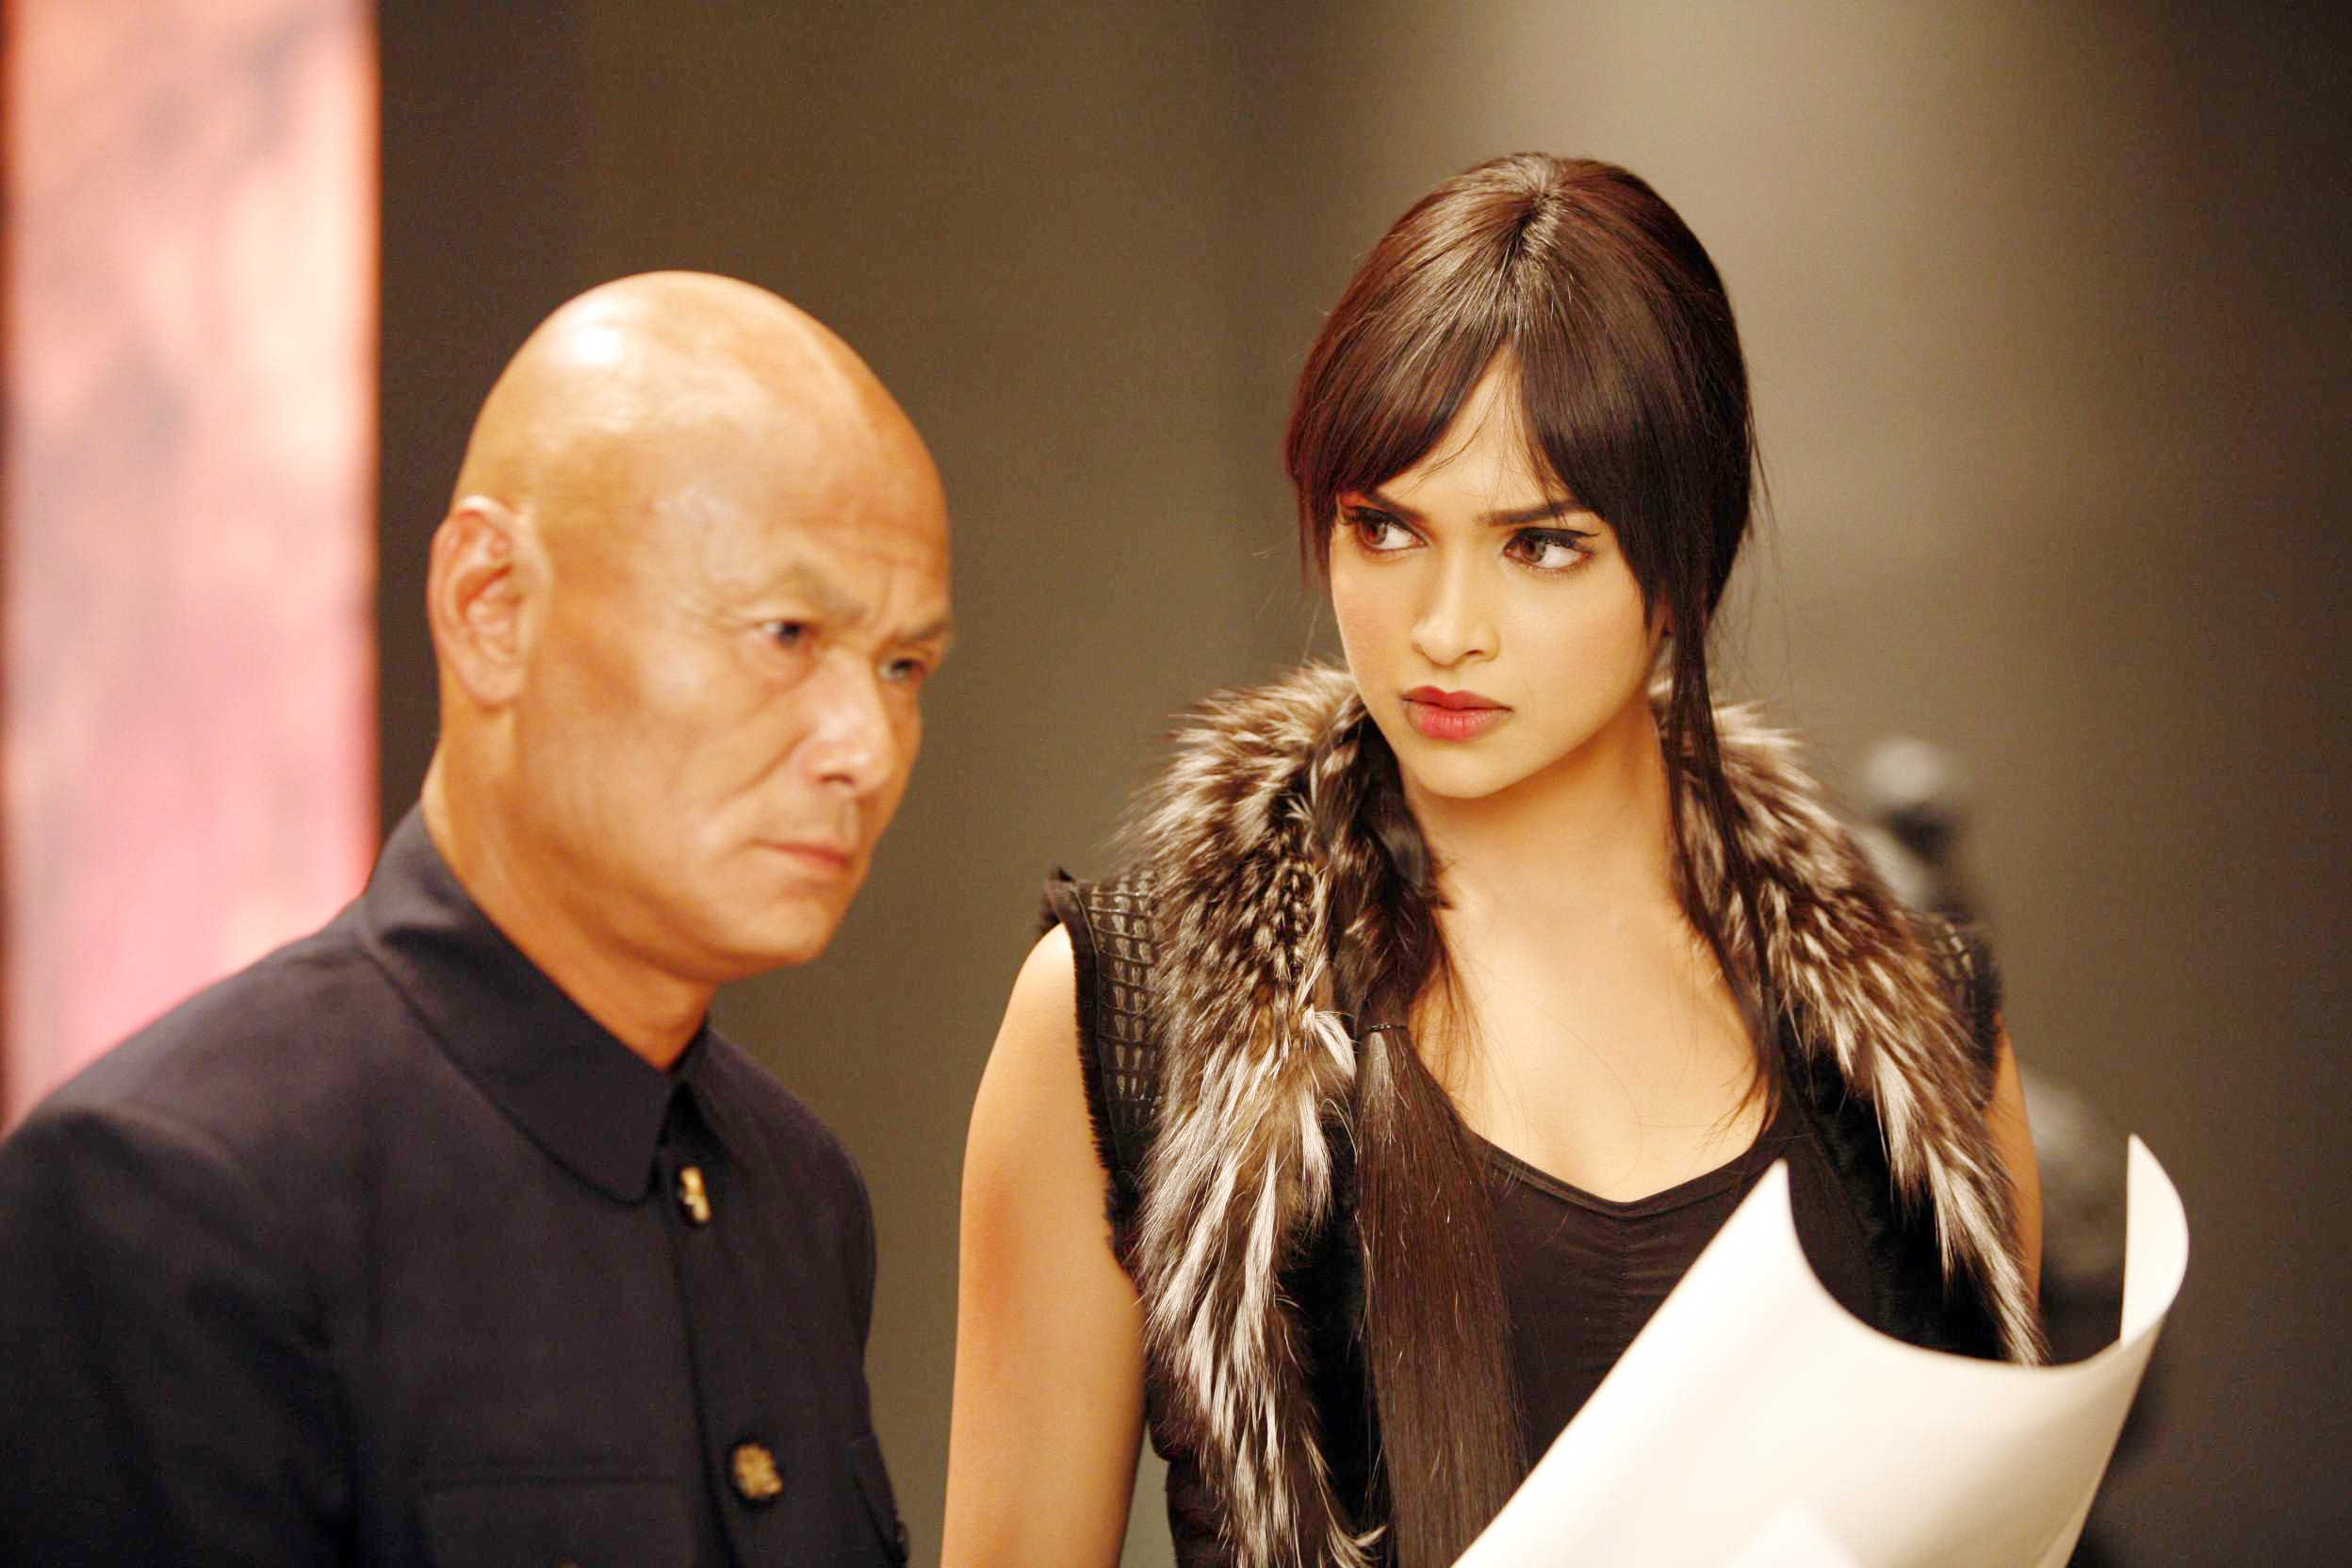 Gordon Liu stars as Hojo and Deepika Padukone stars as Meow Meow in Warner Bros. Pictures' Chandni Chowk to China (2009). Photo credit by Sheena Sippy.